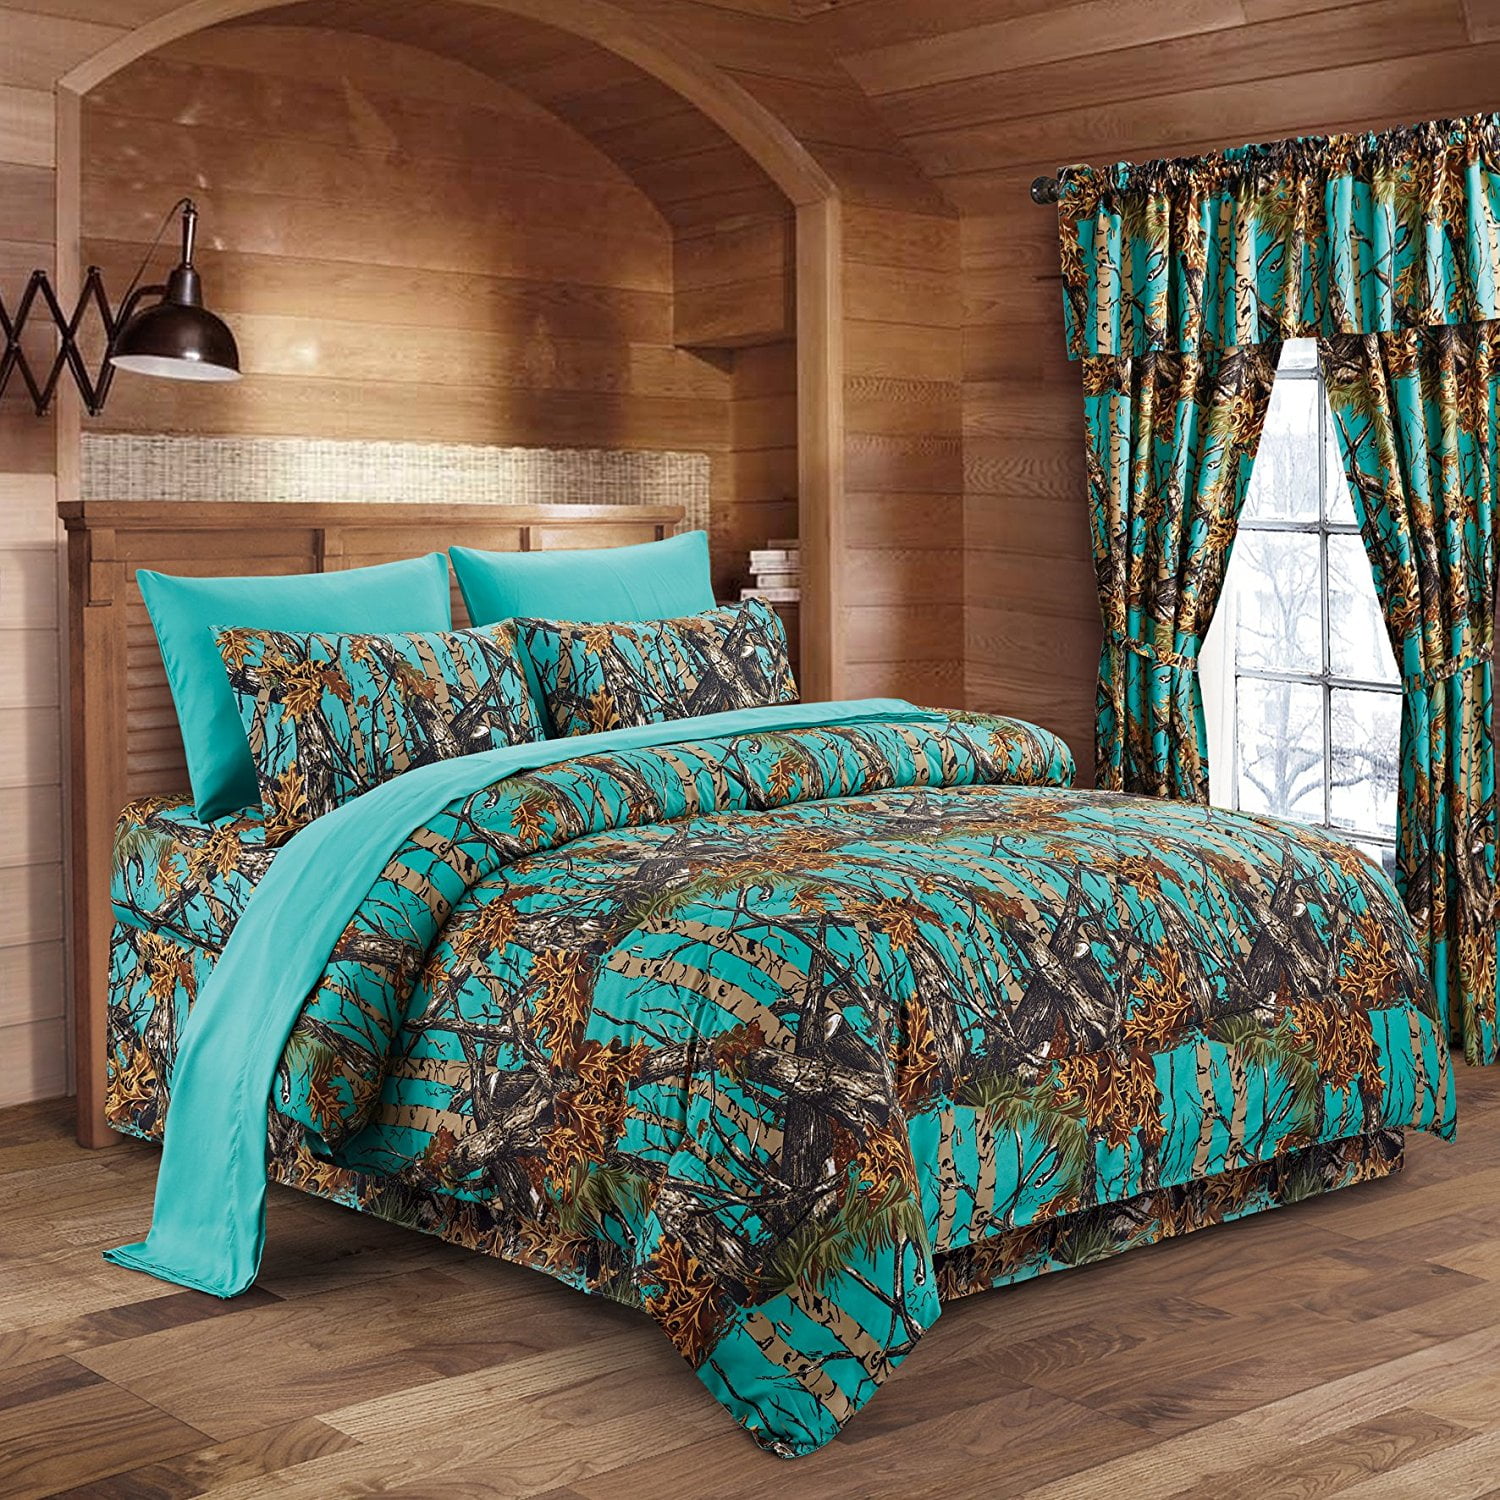 TEAL CAMO KING COMFORTER QUEEN SHEET CAMOUFLAGE TWO CURTAINS 17 PC MIXED SIZE! 